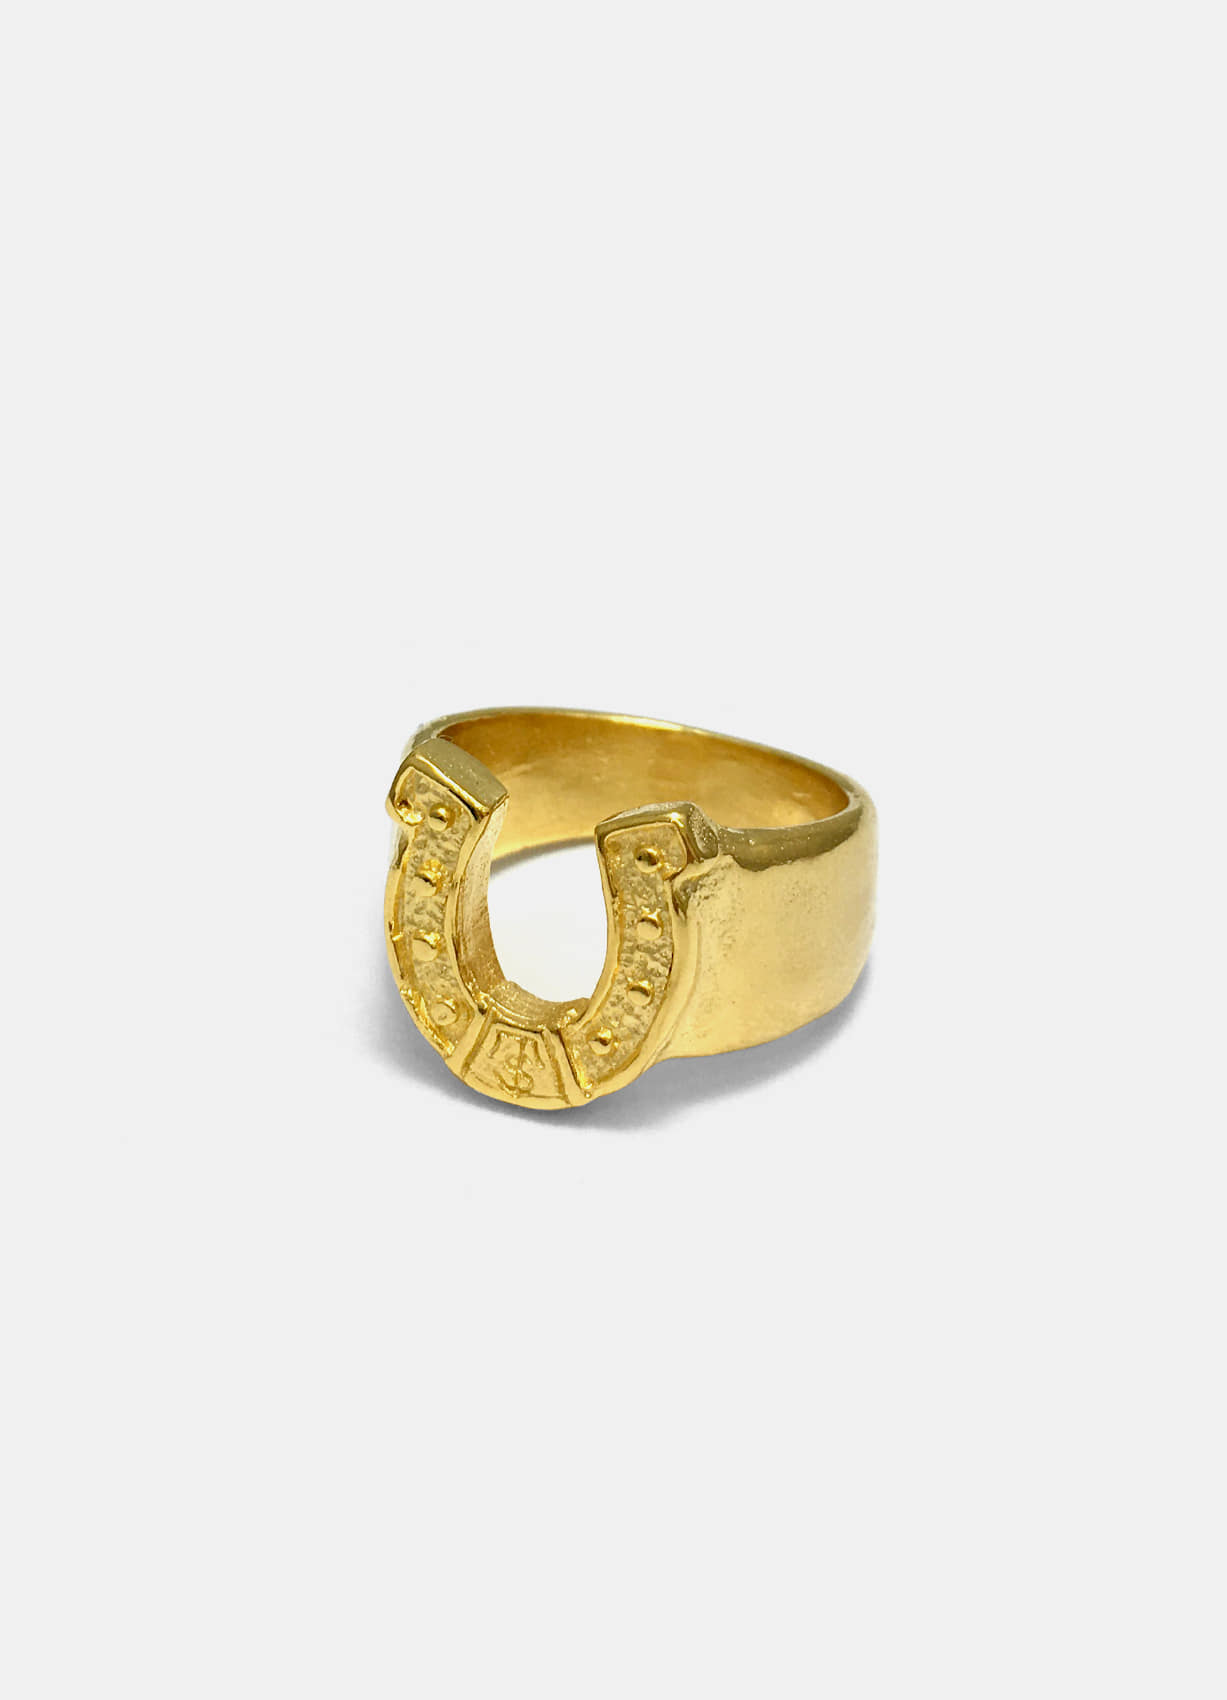 Horse Shoe Gold Ring